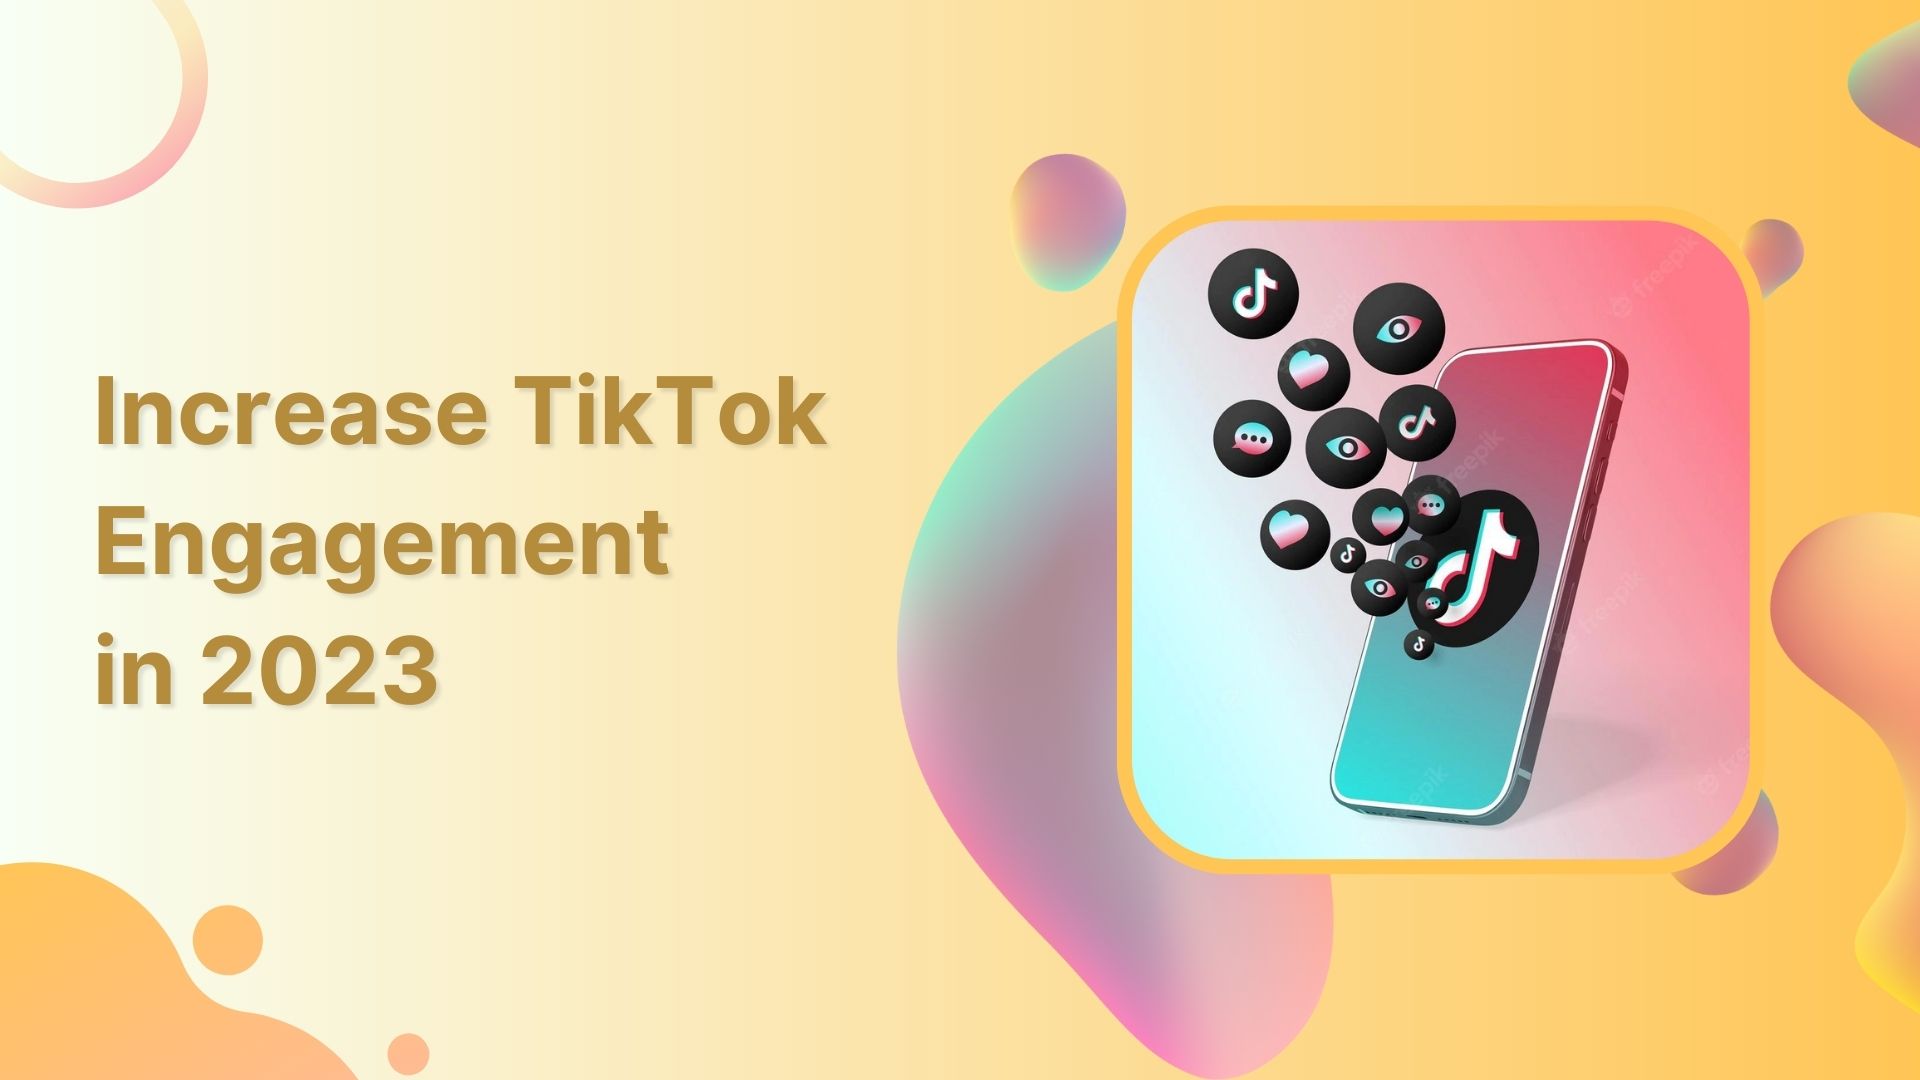 How to Increase TikTok Engagement in 2023